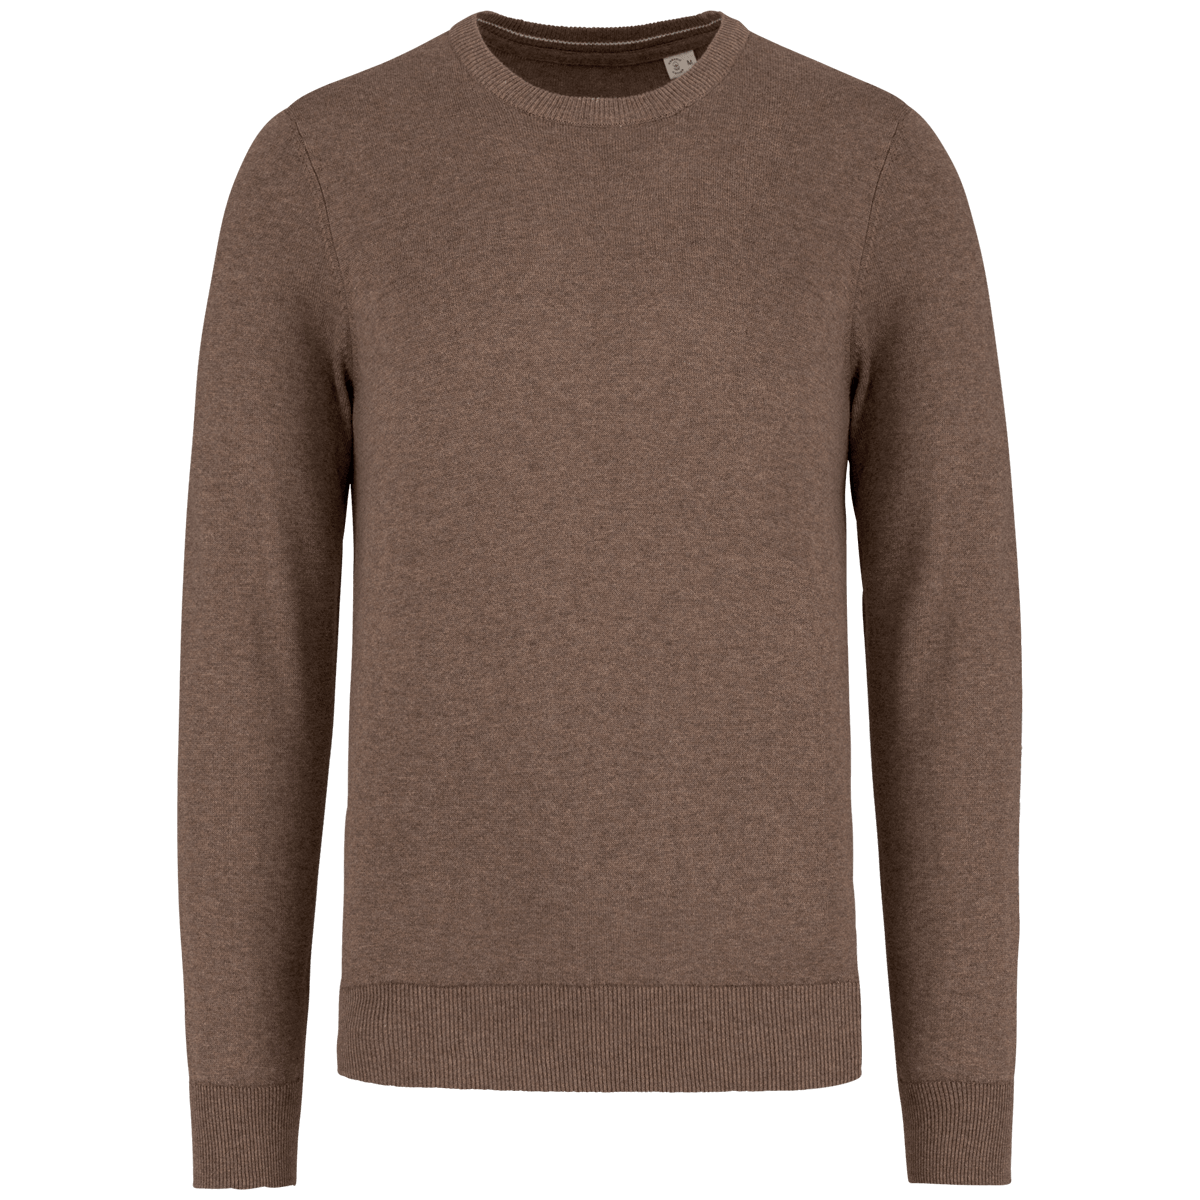 Pull Bio 280Gr Manches Longues | 100% Coton Bio | Broderie Et Flocage Grizzly Brown Heather